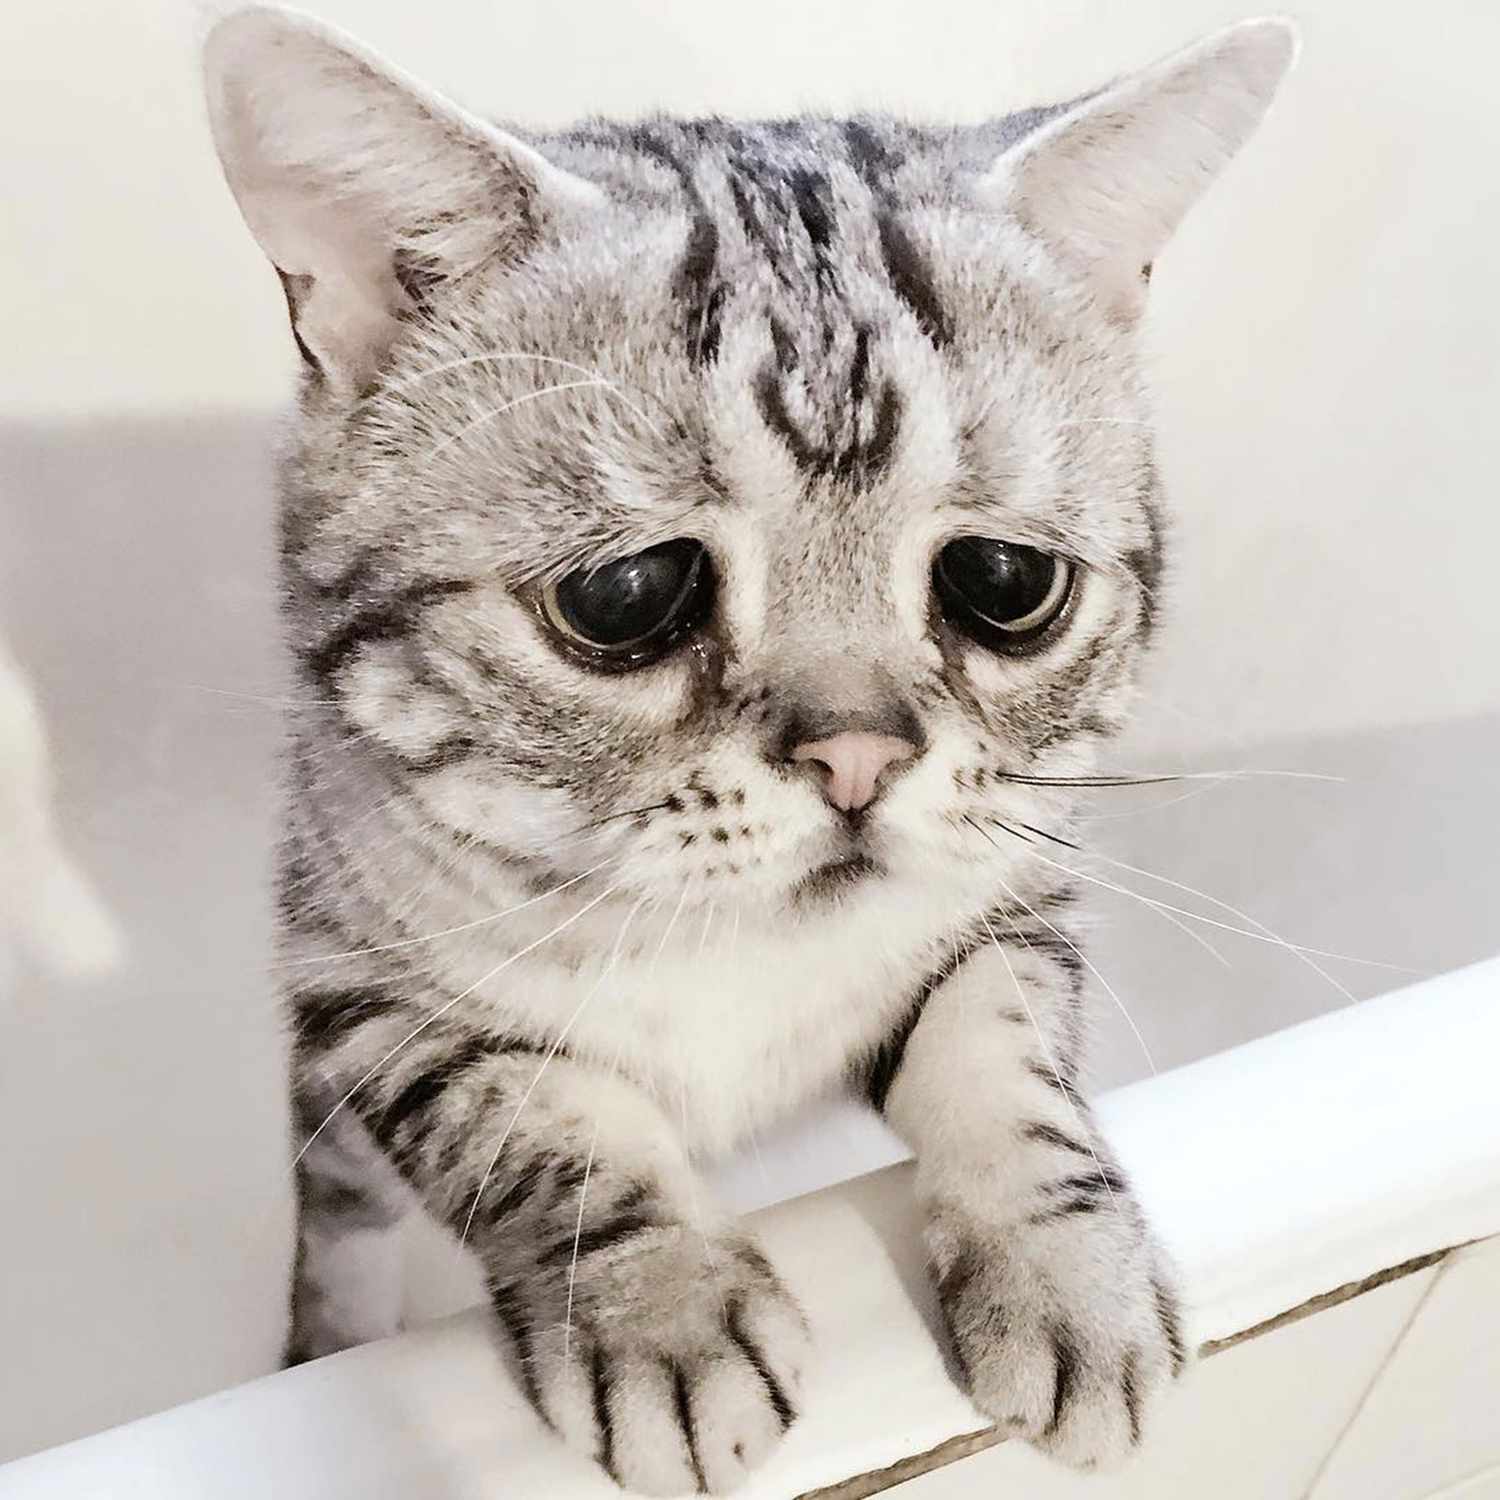 Sad Cat with Permanent Frown goes Viral on Instagram | PEOPLE.com